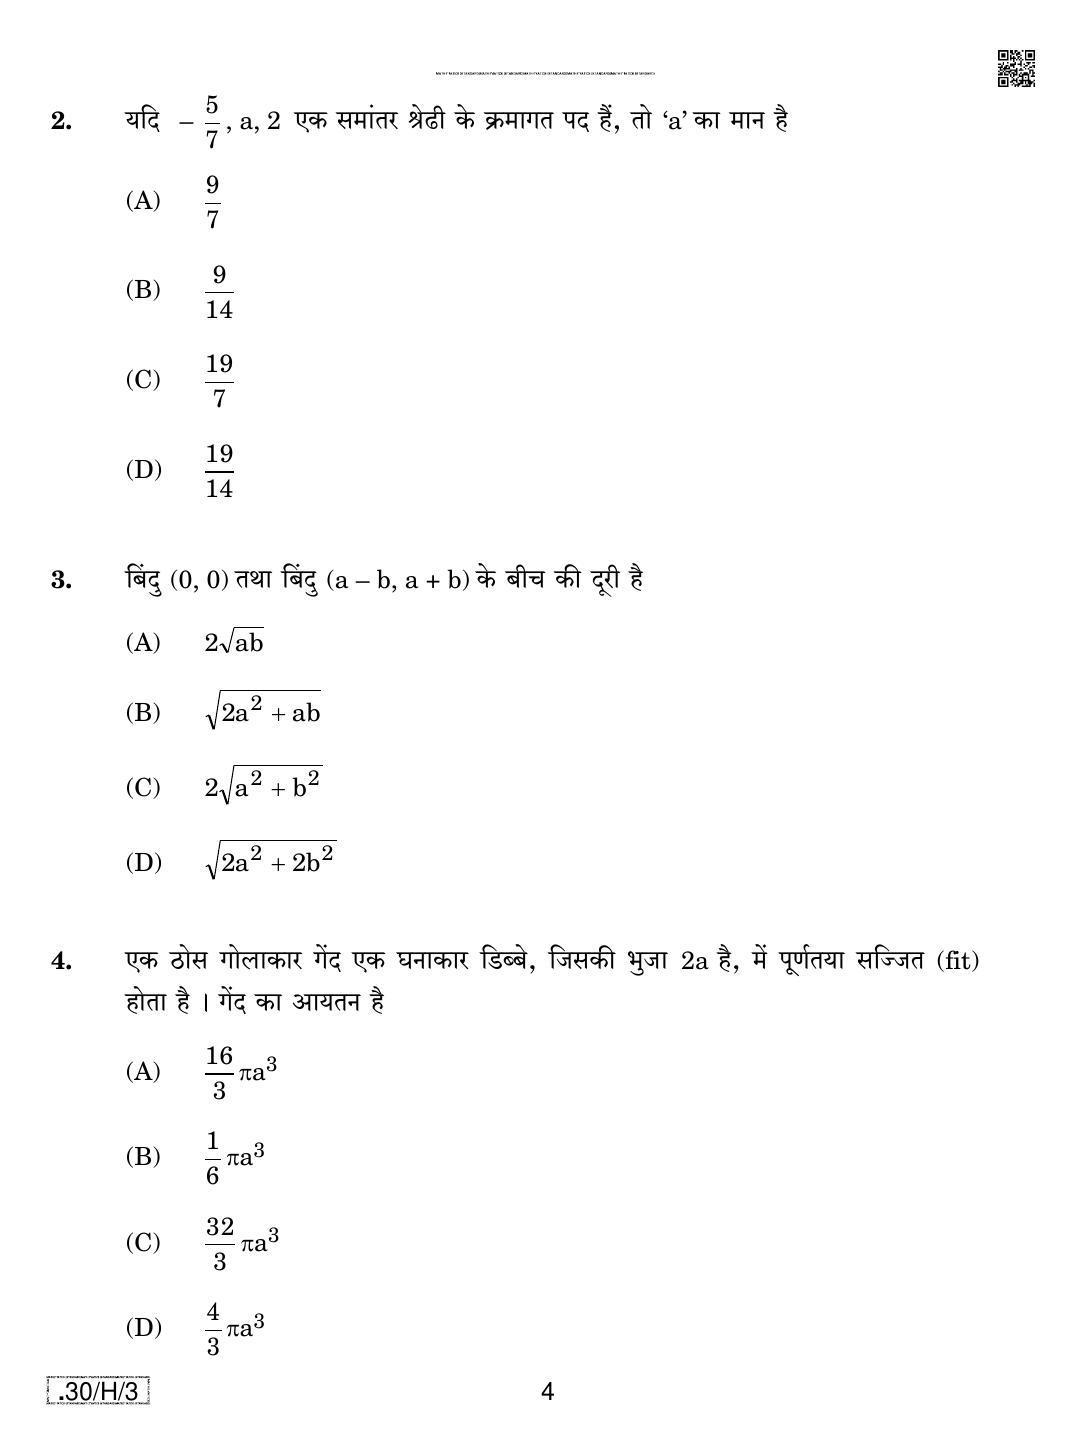 CBSE Class 10 30-C-3 - Maths (Standard) 2020 Compartment Question Paper - Page 4